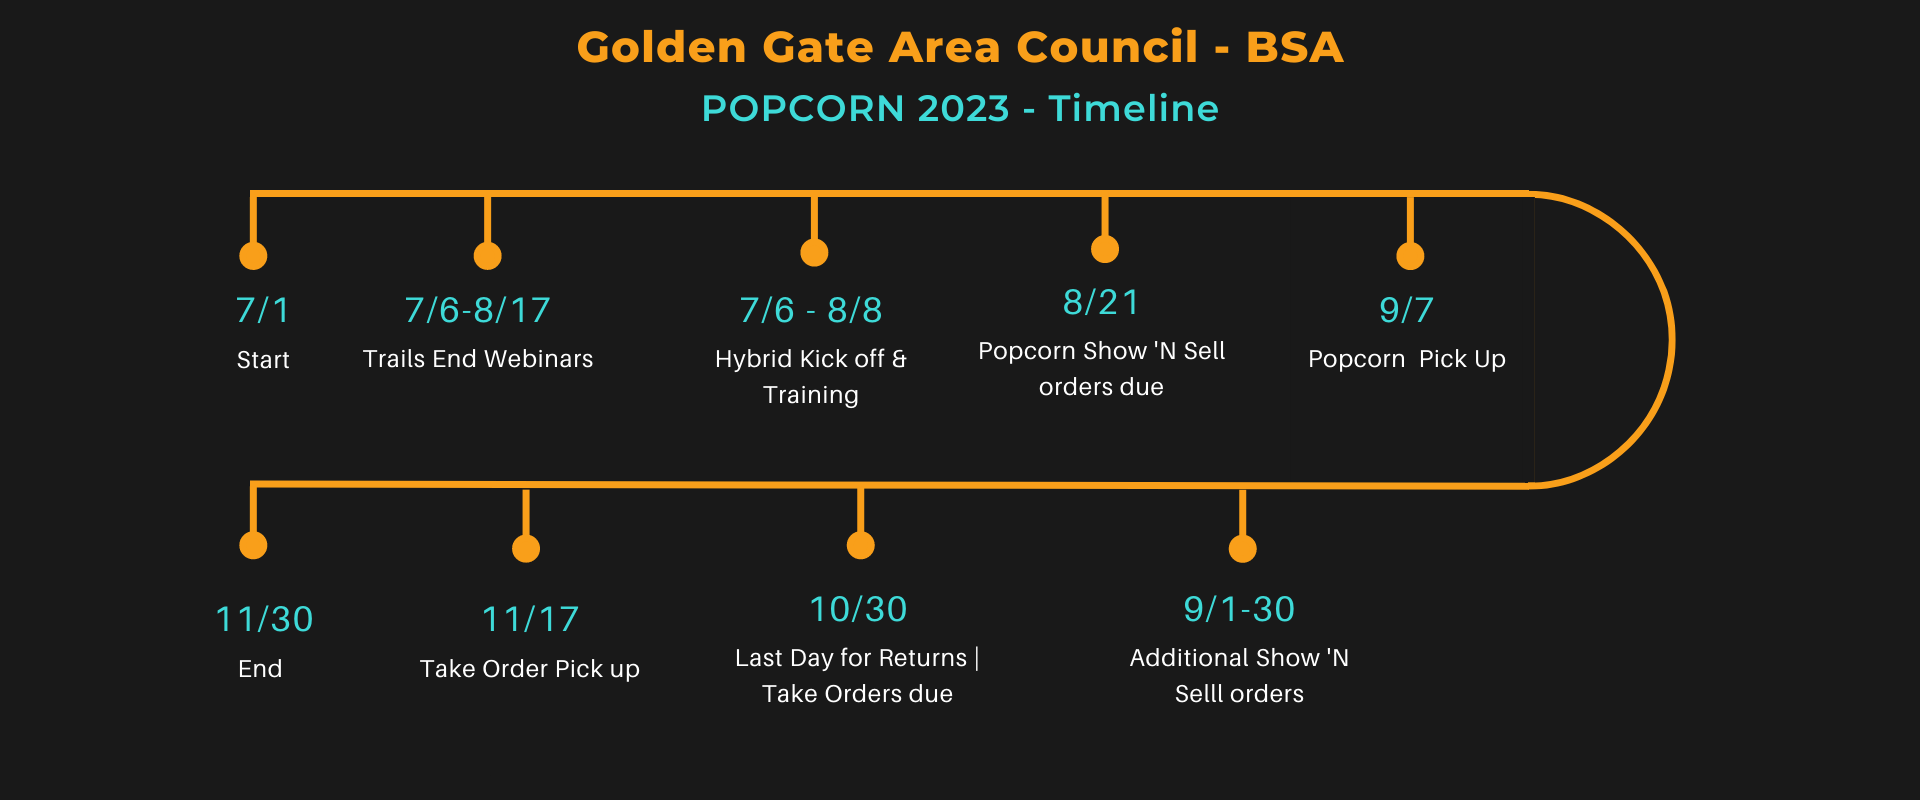 Graphic timeline showing key dates for the popcorn promotion